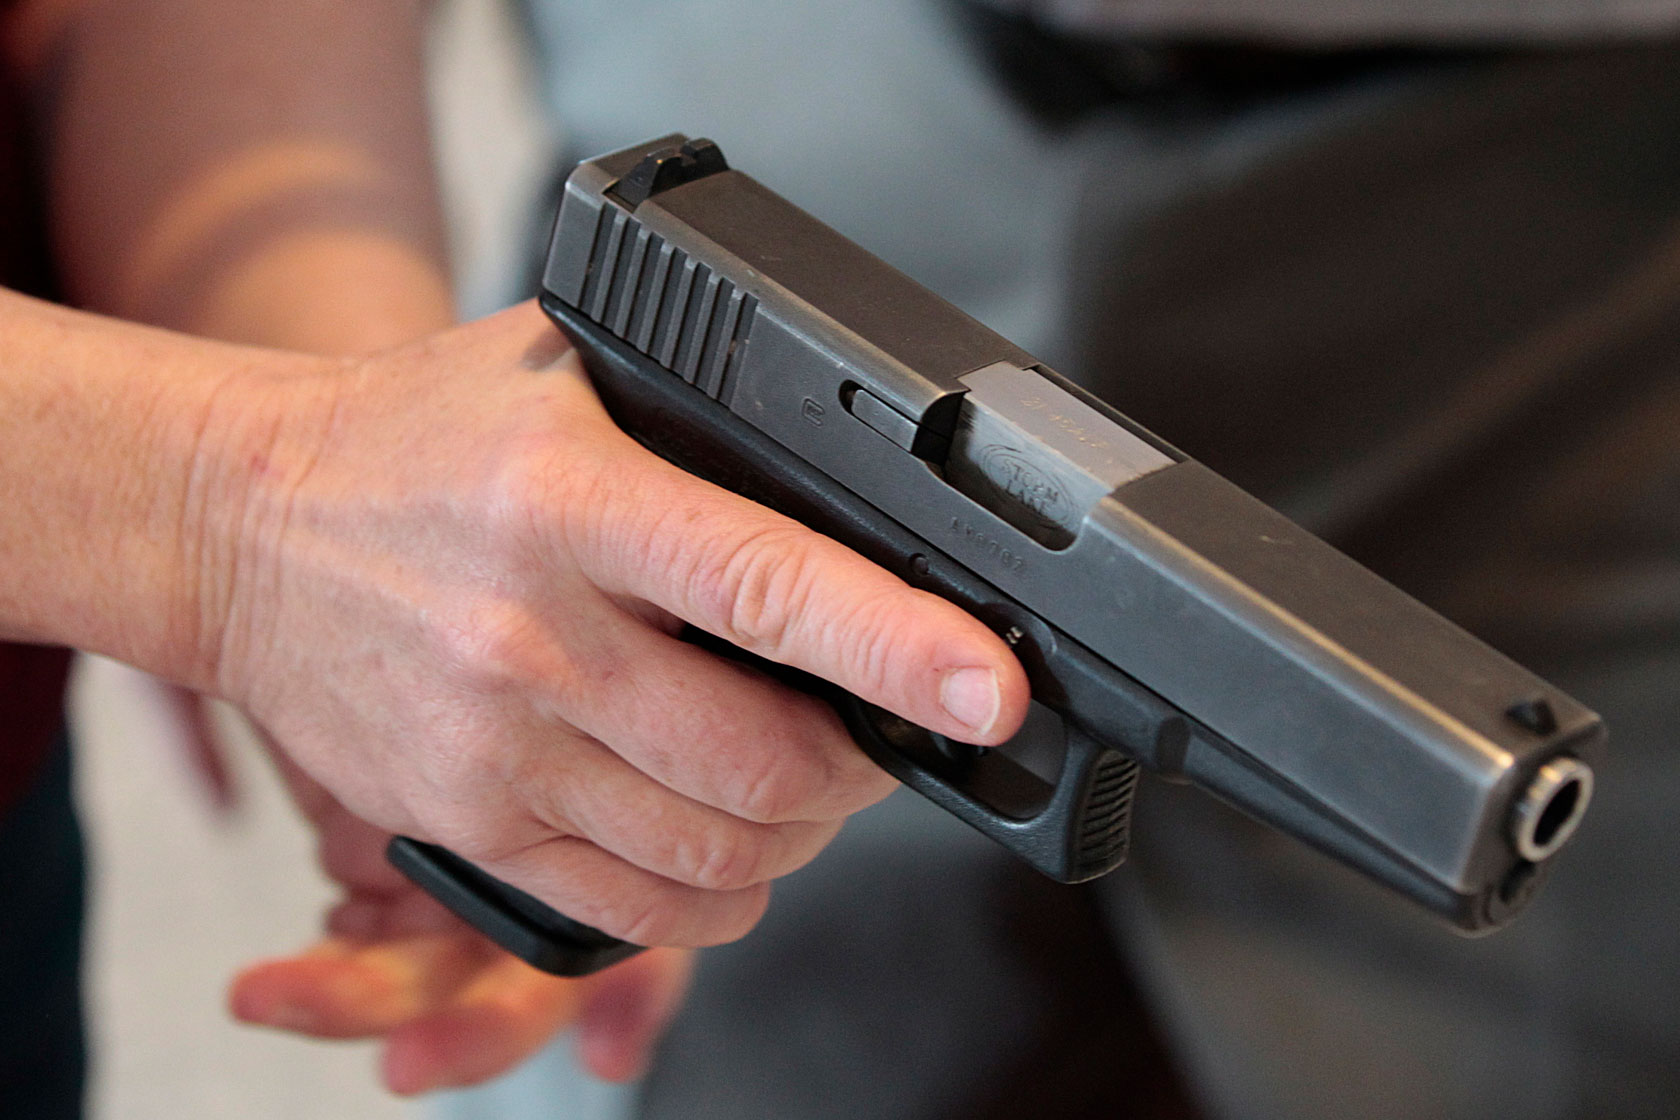 Carrying a Concealed Weapon Charges in Ontario